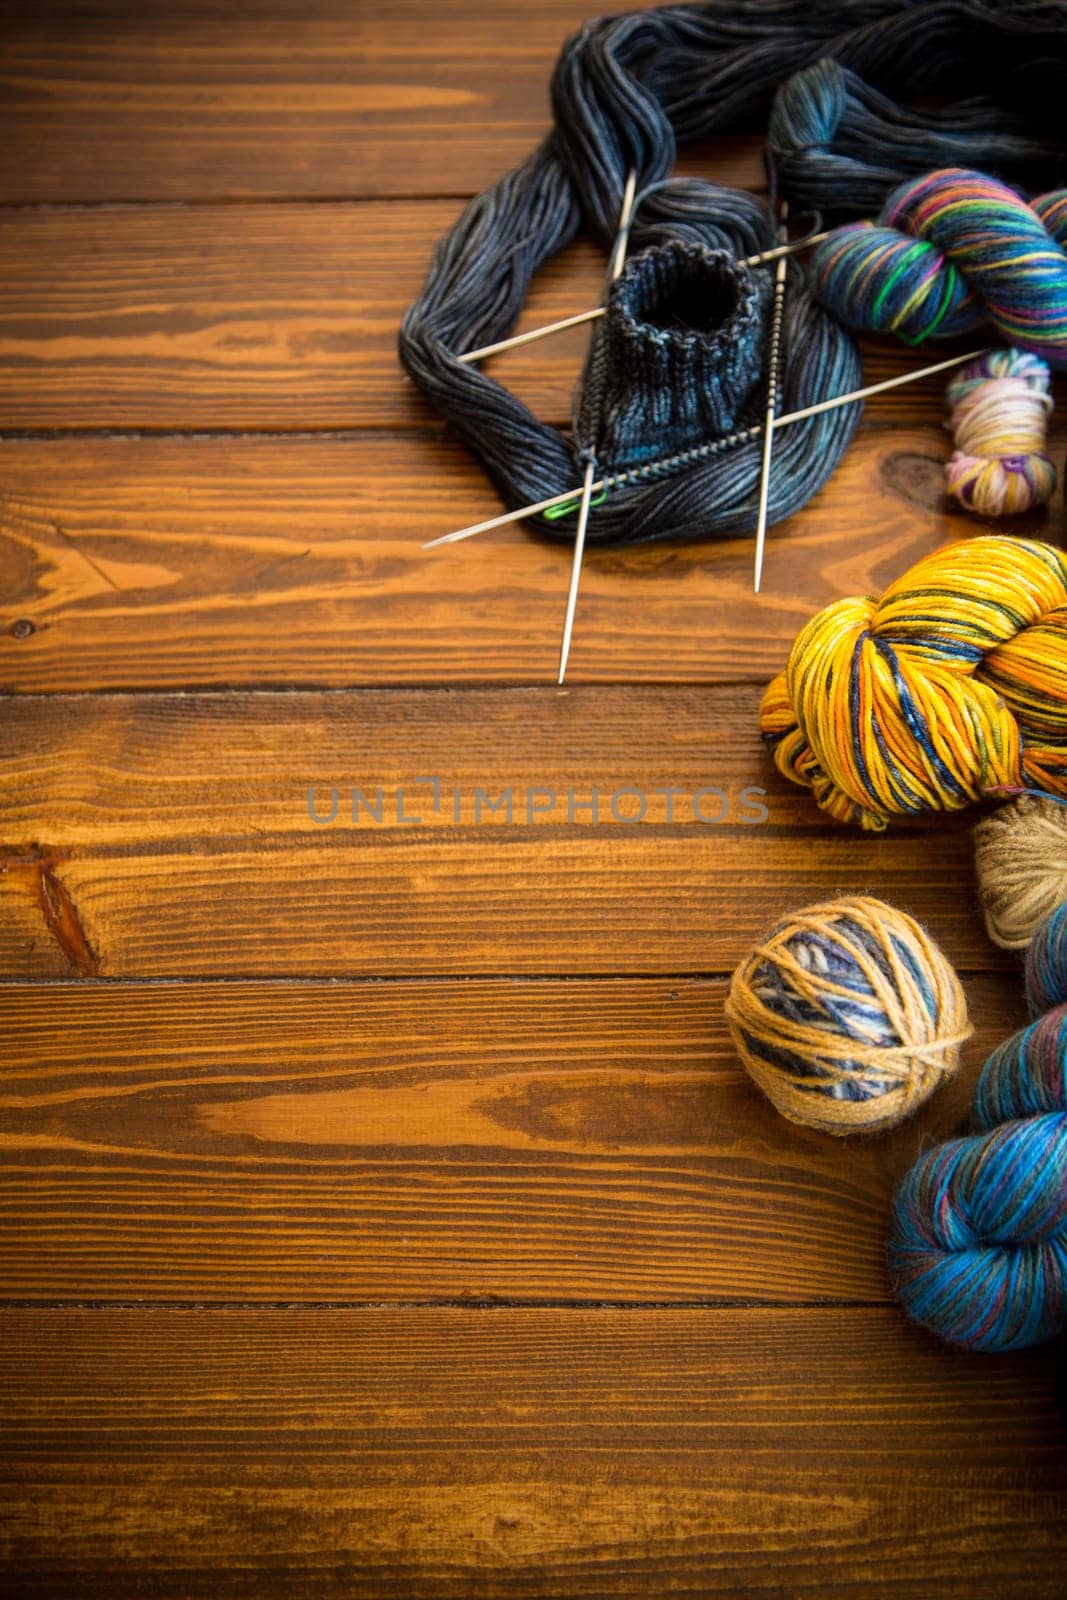 Colored threads, knitting needles and other items for hand knitting, on a dark wooden table .